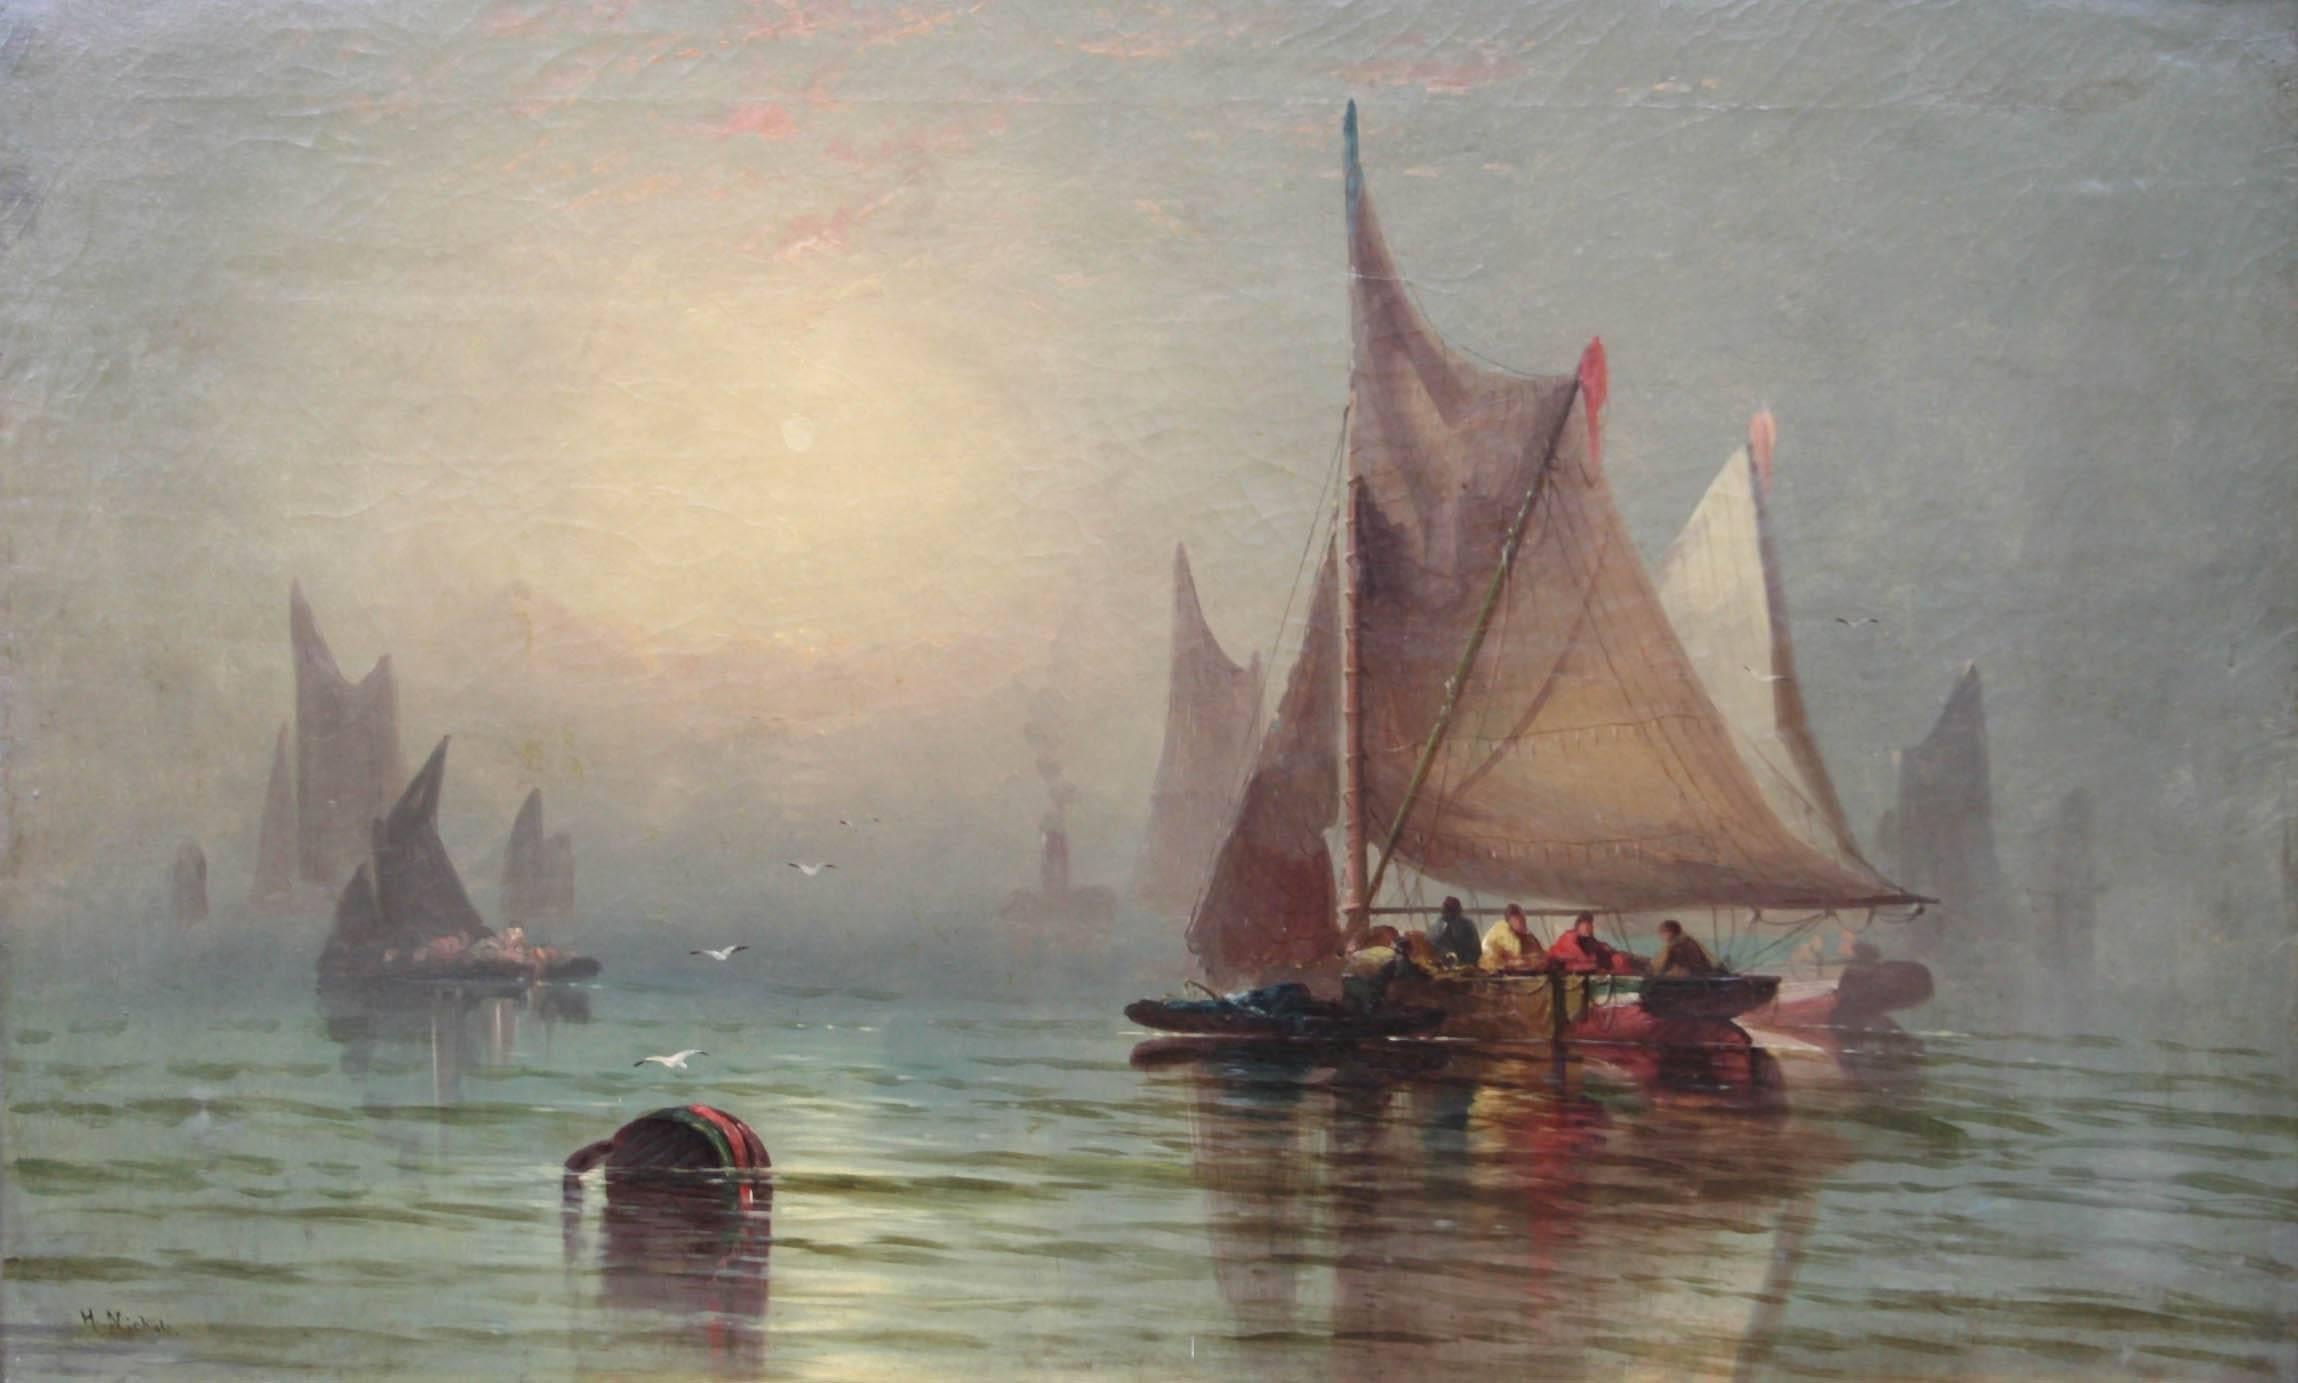 Henry Hobart Nichols, Jr. (American 1869-1962).

Fishing boats in Harbor.

Oil on canvas, signed lower left. 

Painting size: 22” x 36”.
Frame size: 33” x 47”.

 A painter and illustrator, Nichols was born in Washington, DC. His father was